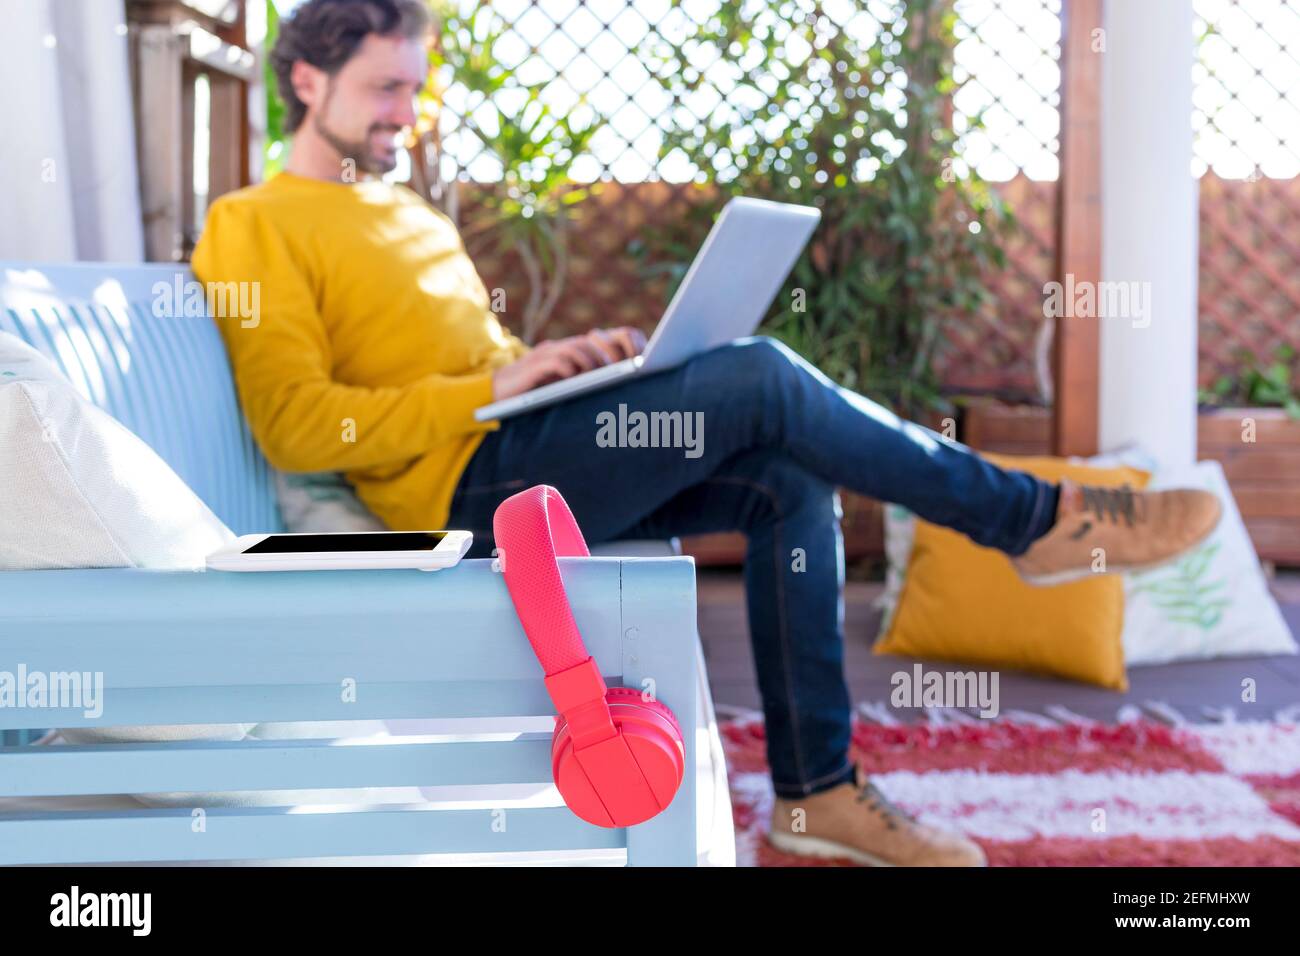 Unfocus and unrecognizable man on background working on his laptop. Red headphones on focus on foreground. Selected focus. Stock Photo